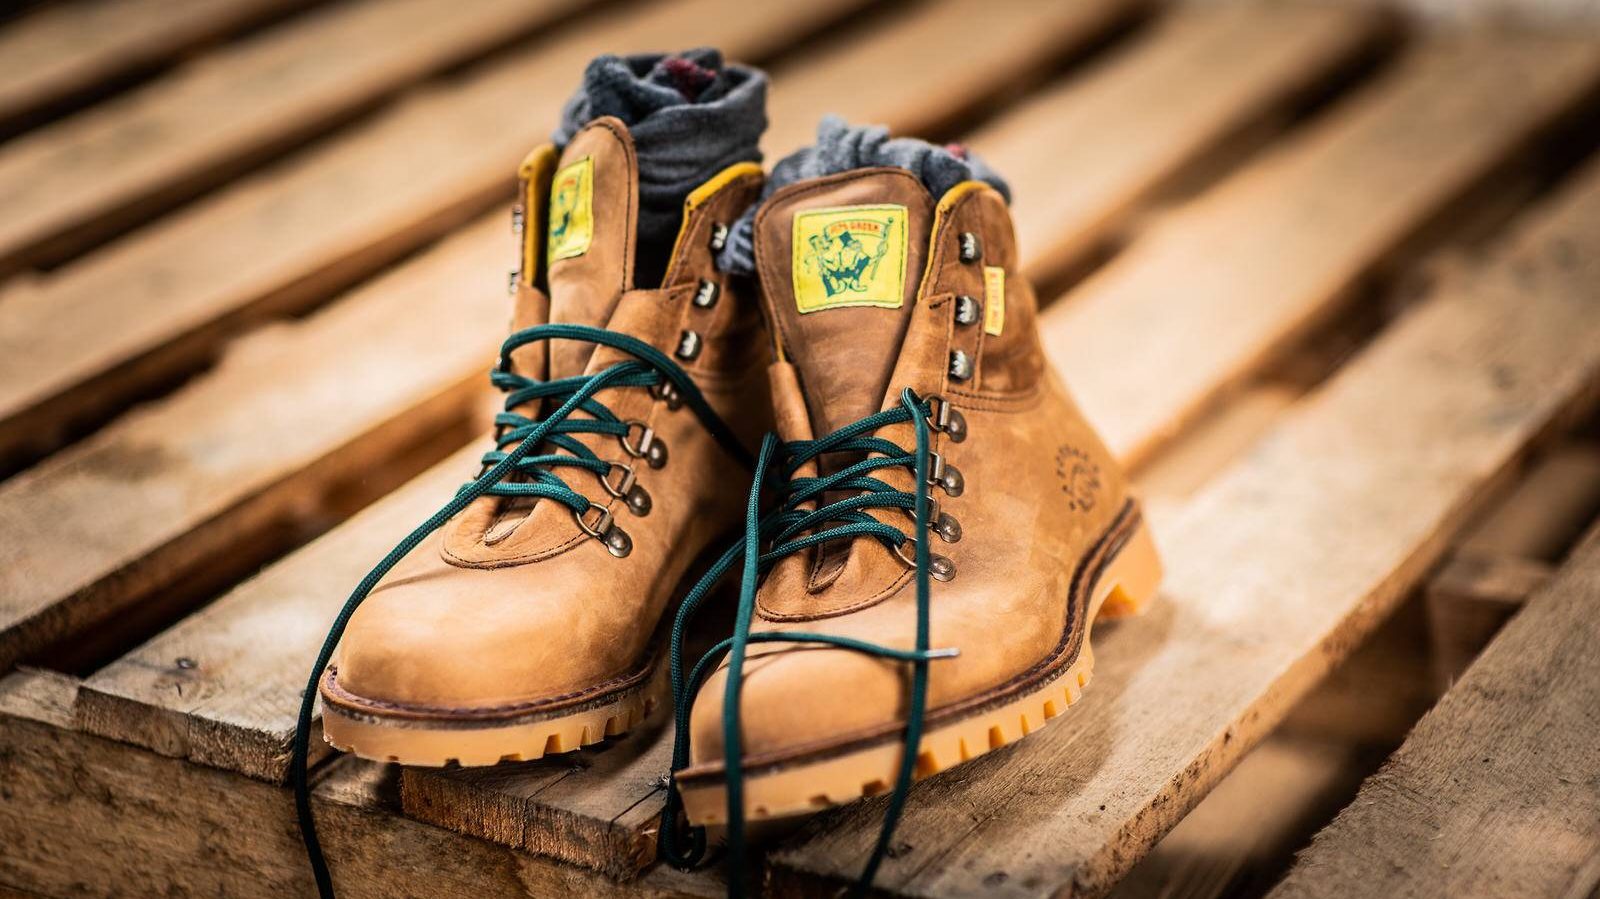 Comparing the cost of work boots to hunting boots